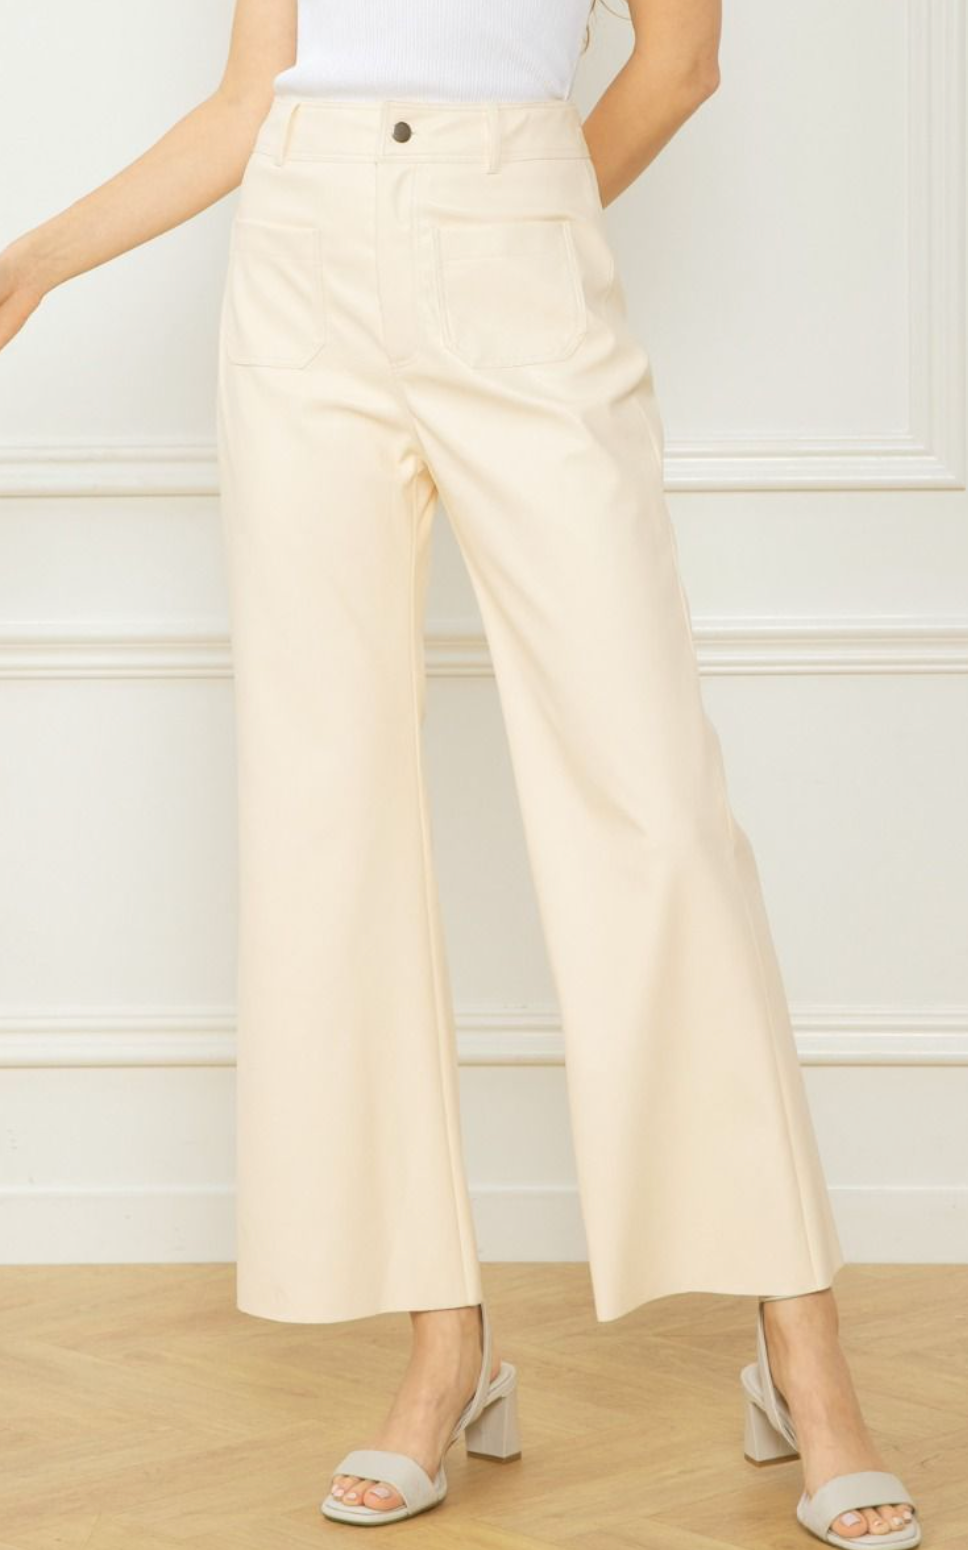 zSALE Etta High Waisted Faux Leather Wide Leg Pant - Cream